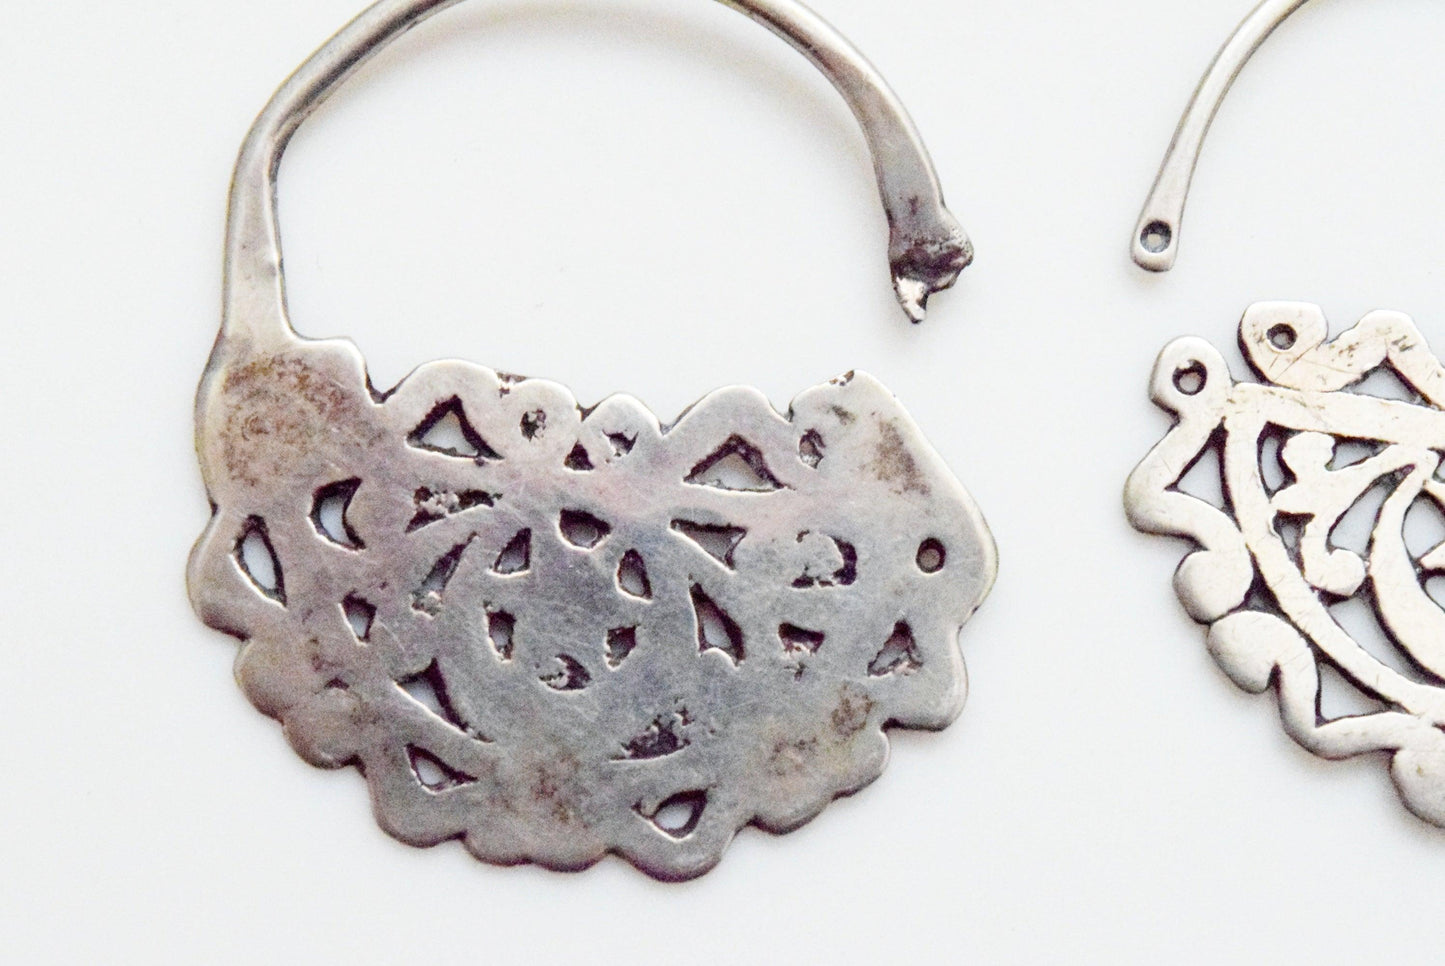 Vintage Small Tunisian Silver Hoop Earrings with Crescent and Star - Anteeka